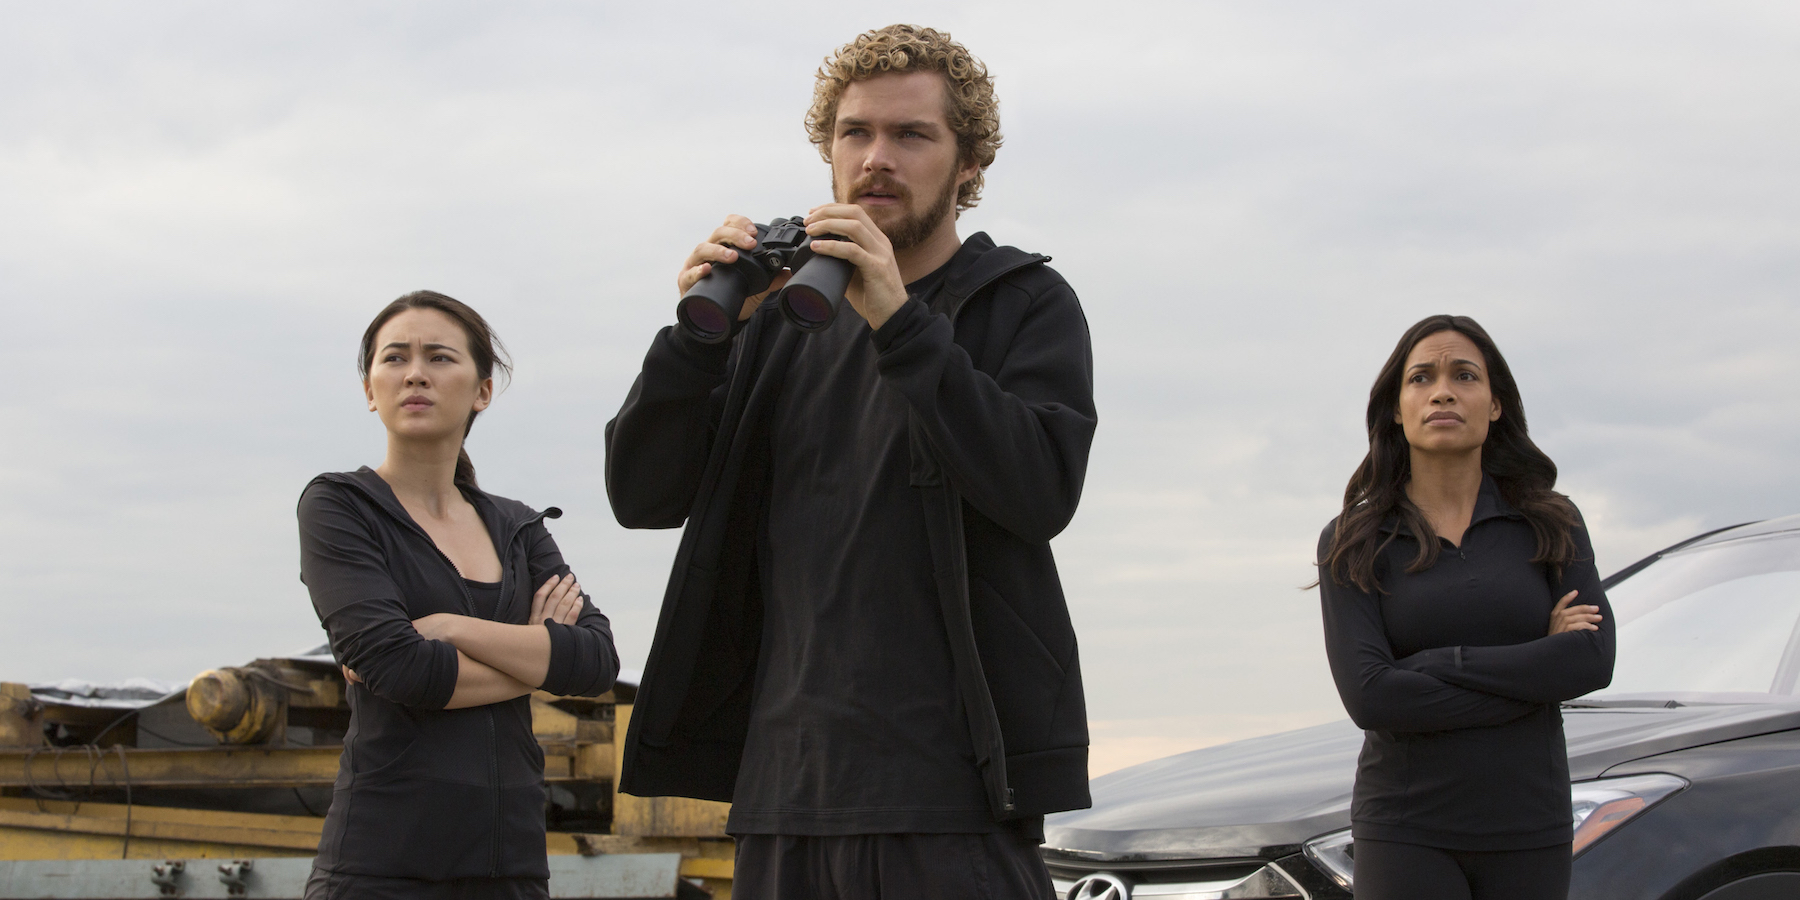 What Is Marvel's 'Iron Fist' Supposed To Be About? - 'Iron Fist' Review